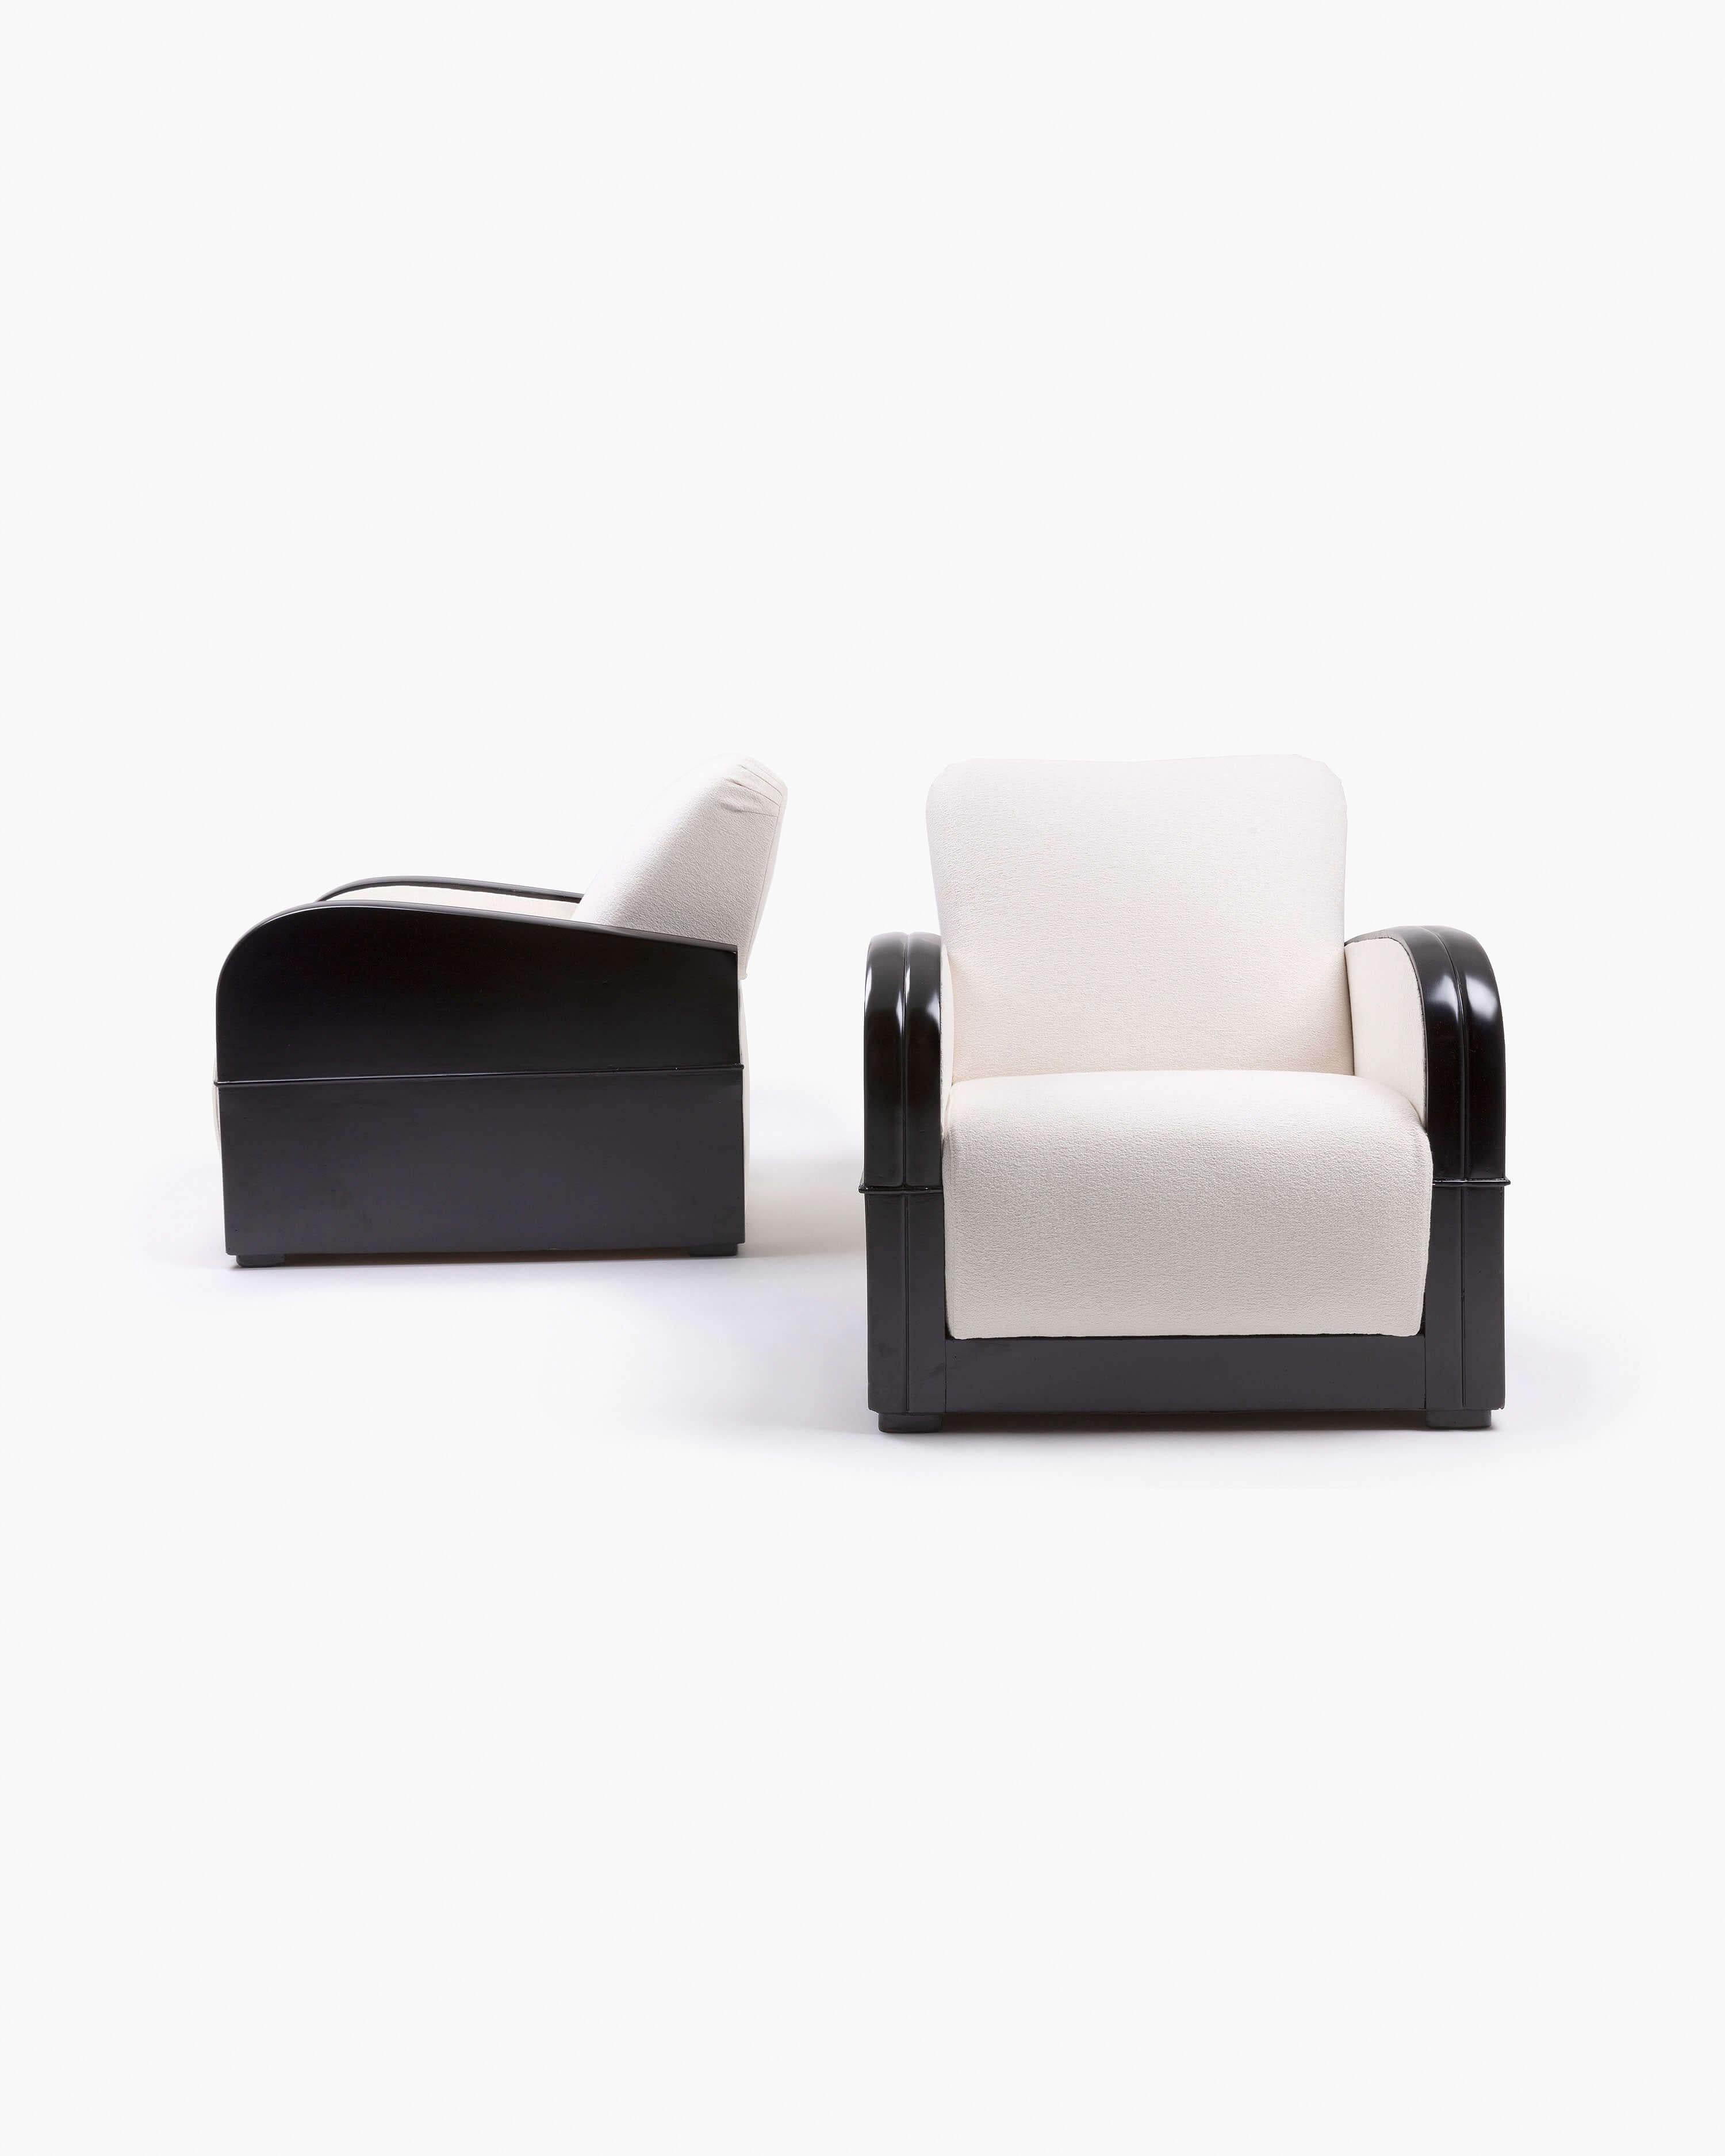 This pair of black lacquered armchairs features plush white bouclé cushioning. High-gloss features are softened slightly by the tufted upholstery to create a luxurious yet cozy set of club chairs–a perfect feature for any thoughtfully curated living